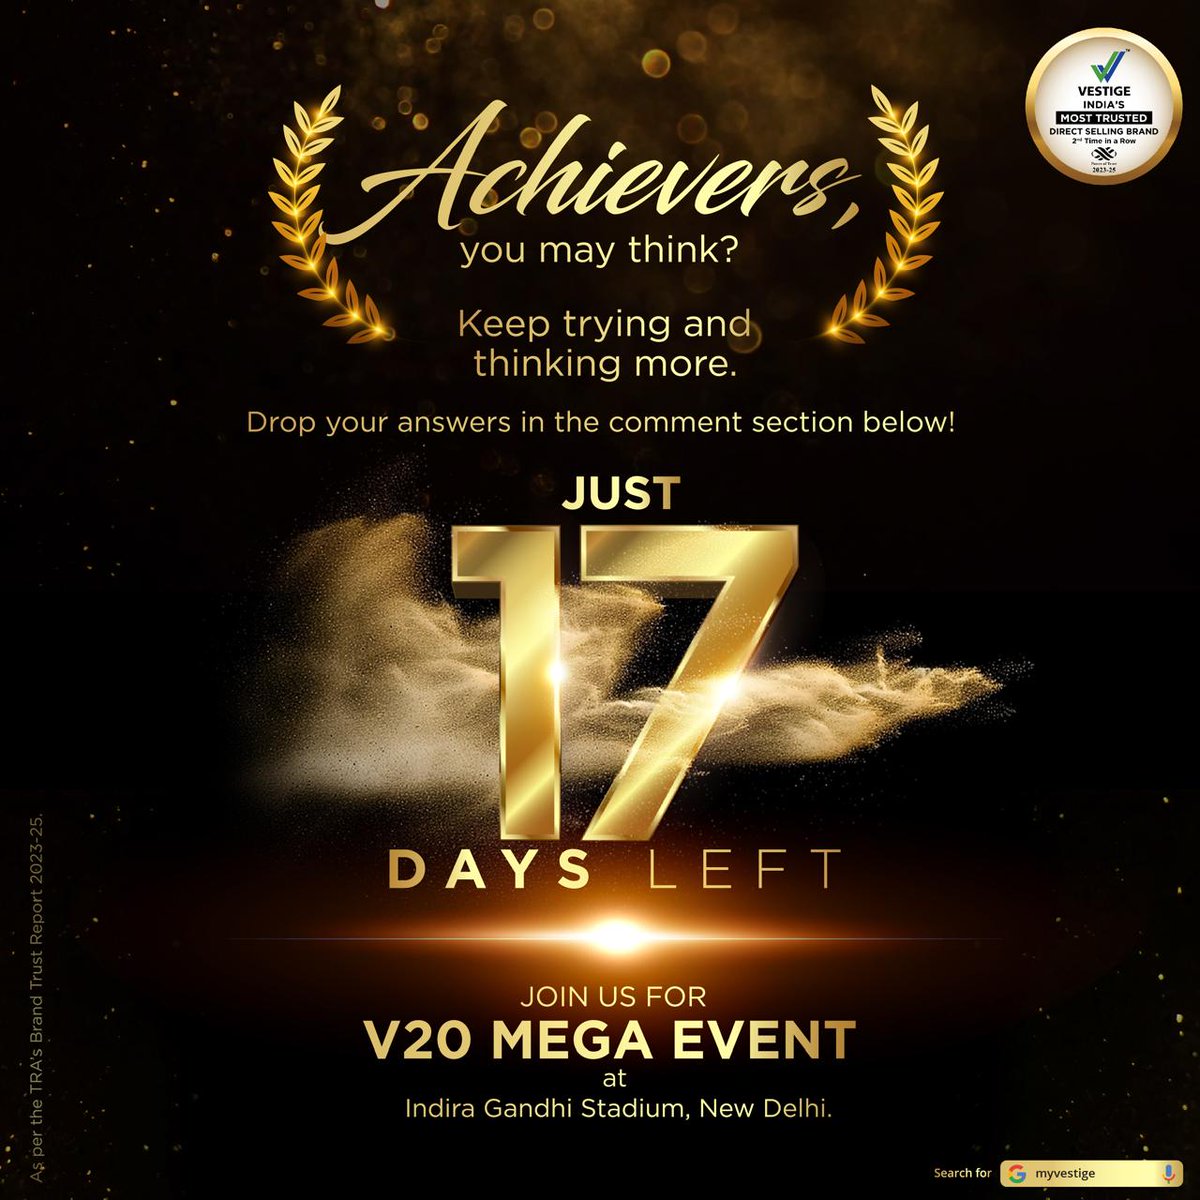 Only 17 days left for the the V20 Mega Event! 

Get ready for an unforgettable experience. 

Stay tuned for more updates.

#Veslim #Vestige #weightmanagement #missionslimpossible #VEDM #Energydrinkmix #wellness #wealth